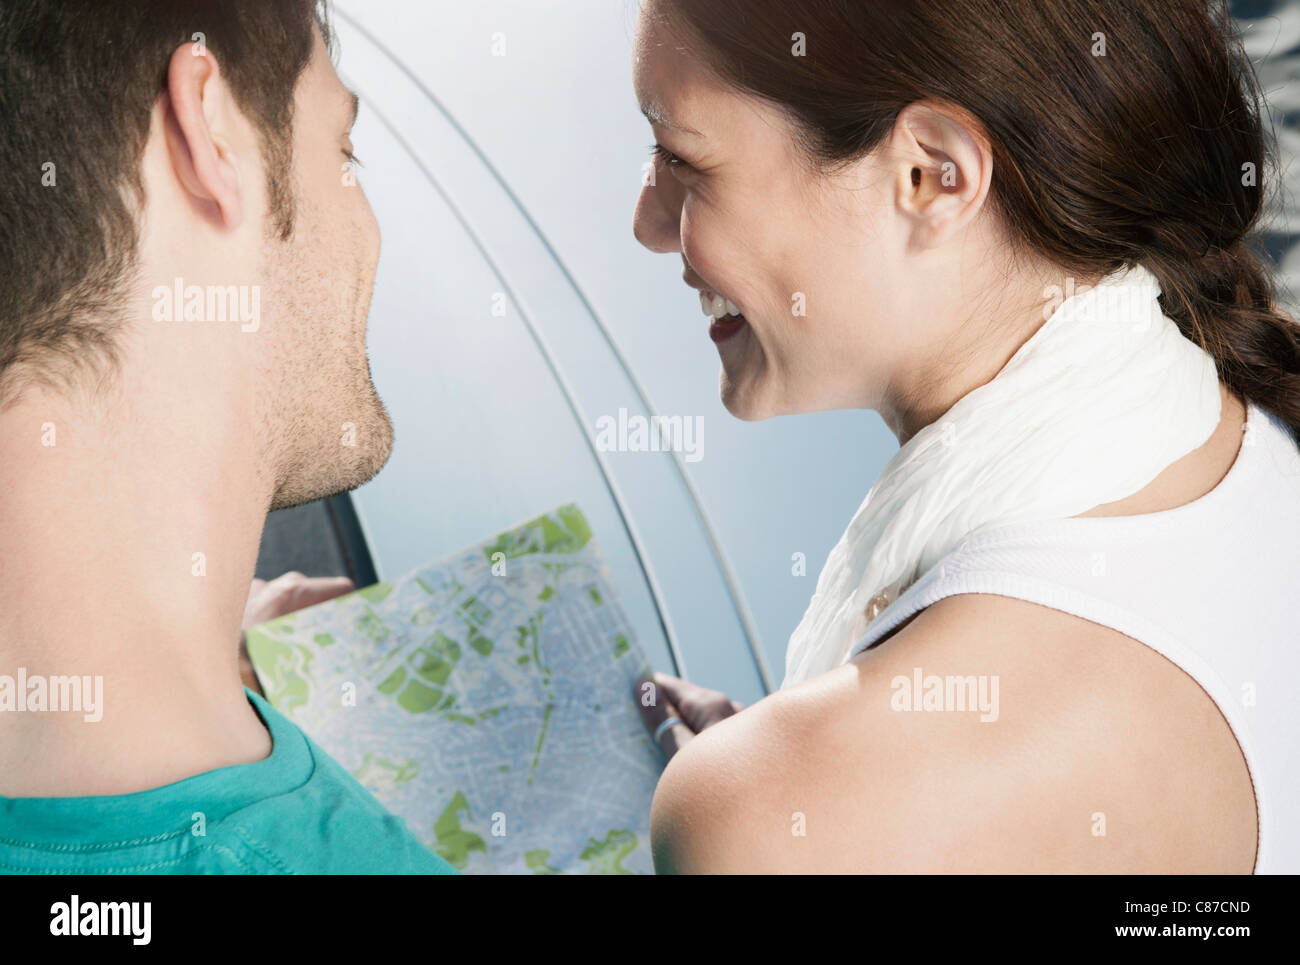 Spain, Majorca, Young couple holding map, smiling Stock Photo